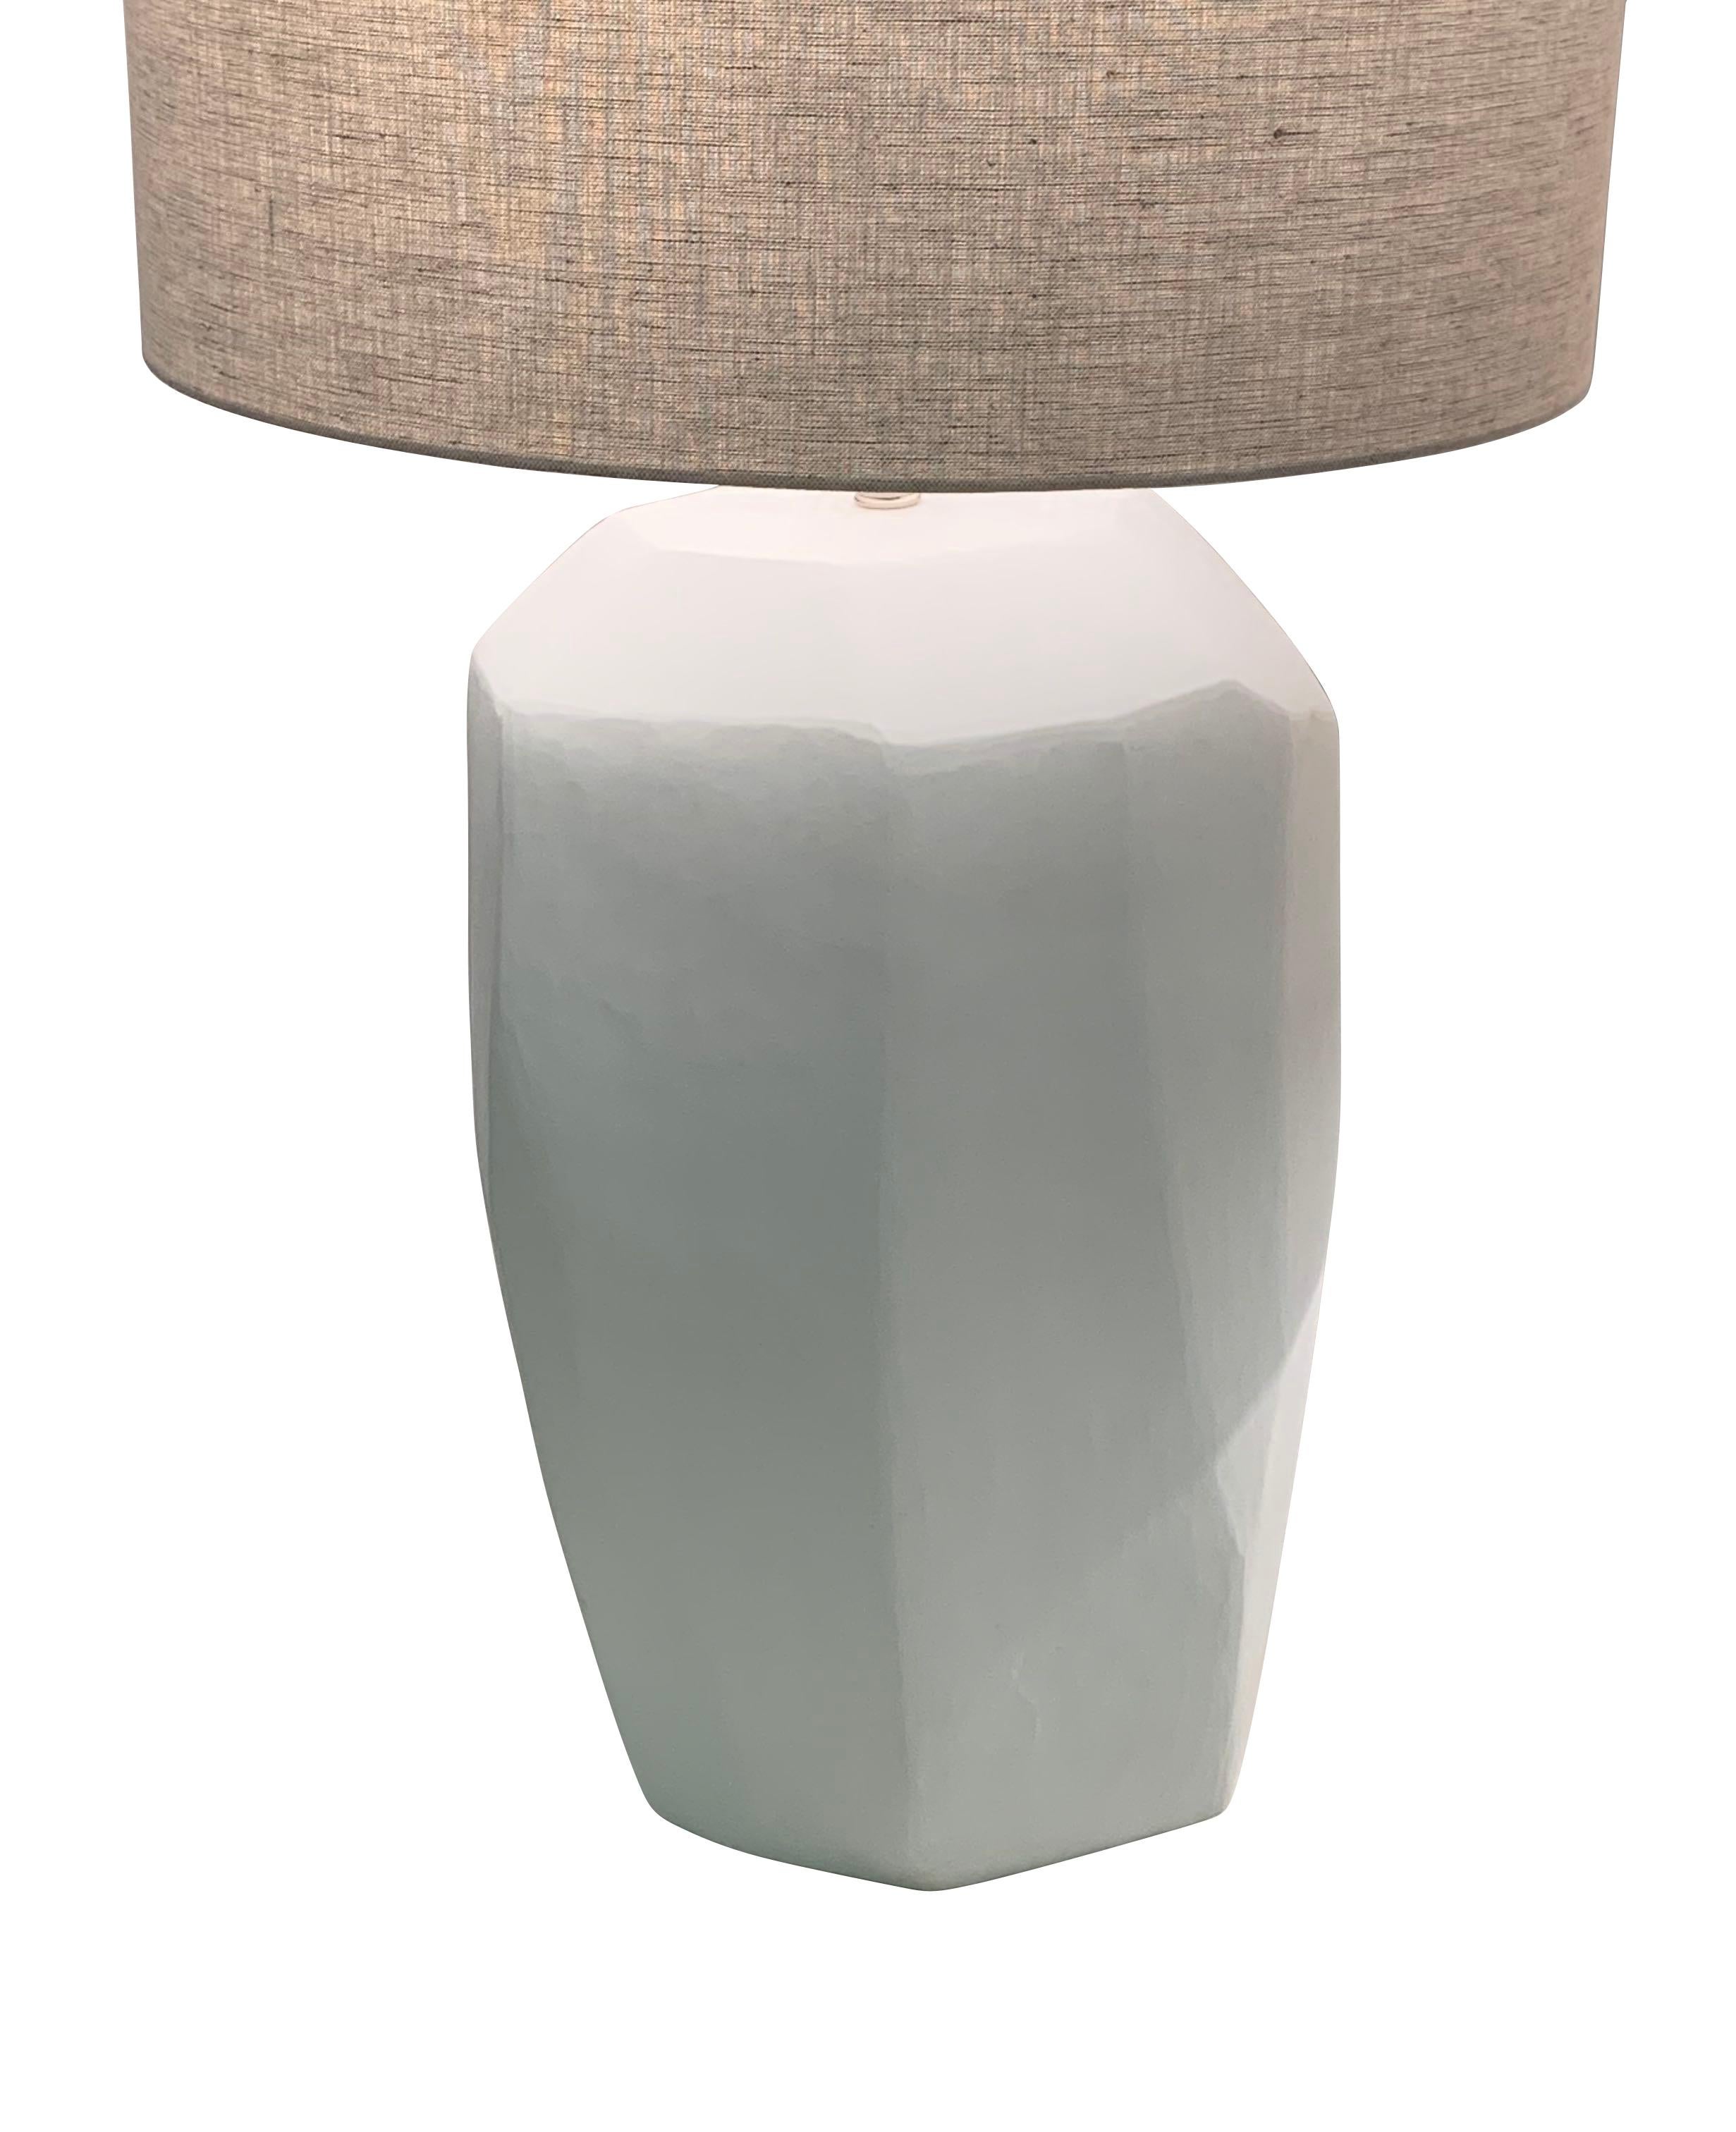 Contemporary Romanian pair of white opaque glass lamps
Tall vertical cubist design
Base measures 9.5